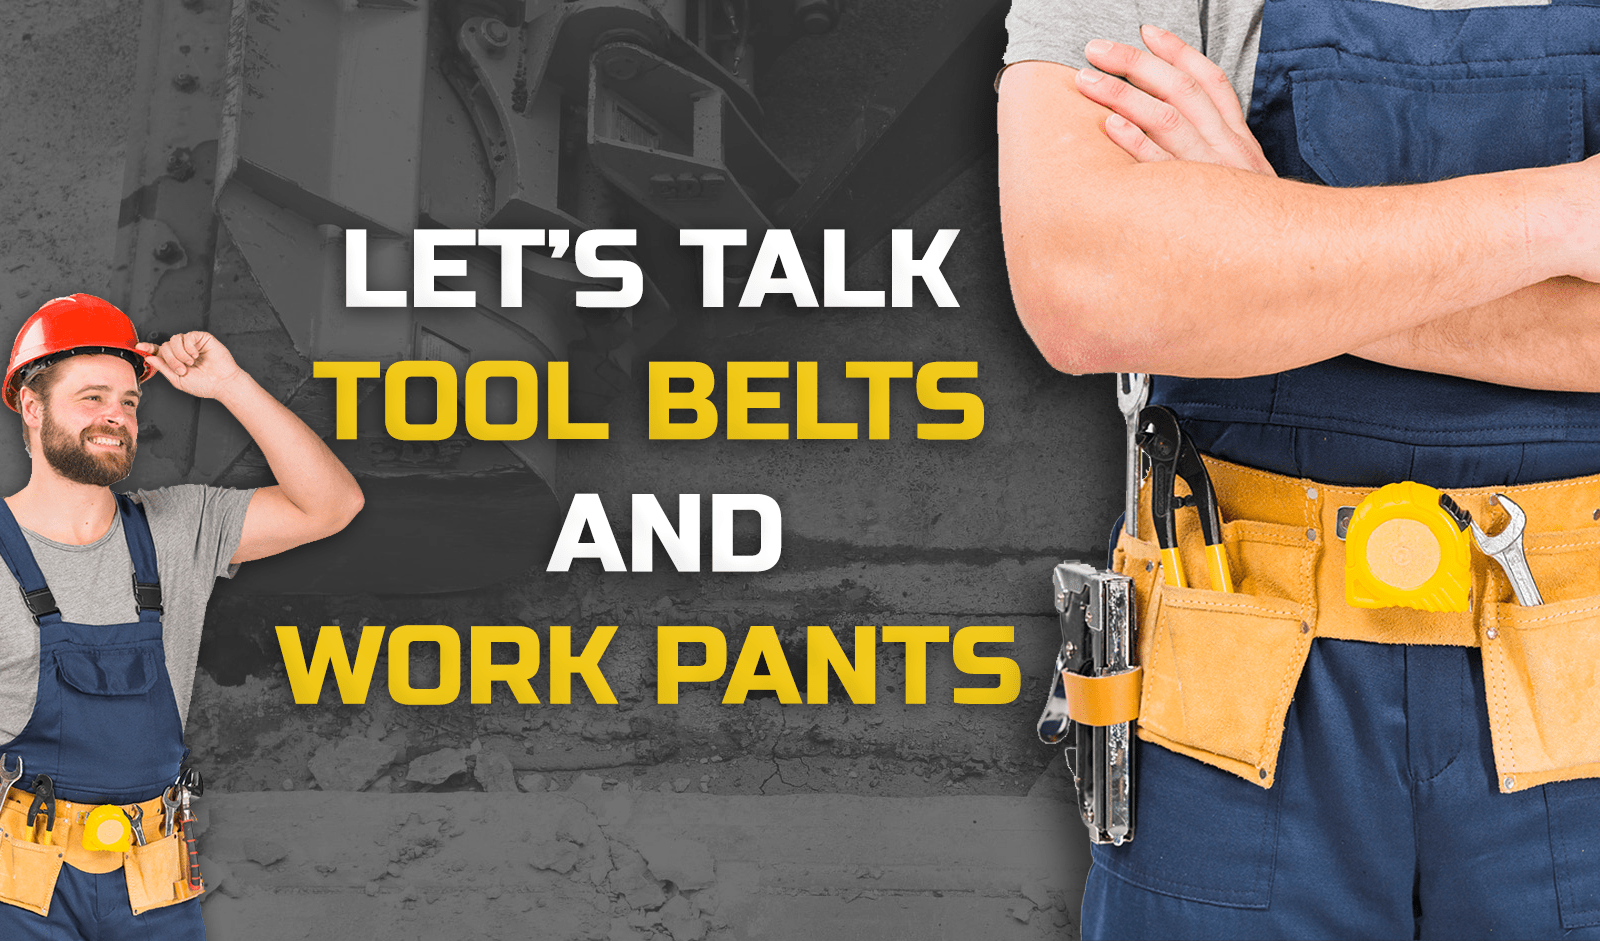 Let’s talk tool belts and work pants!